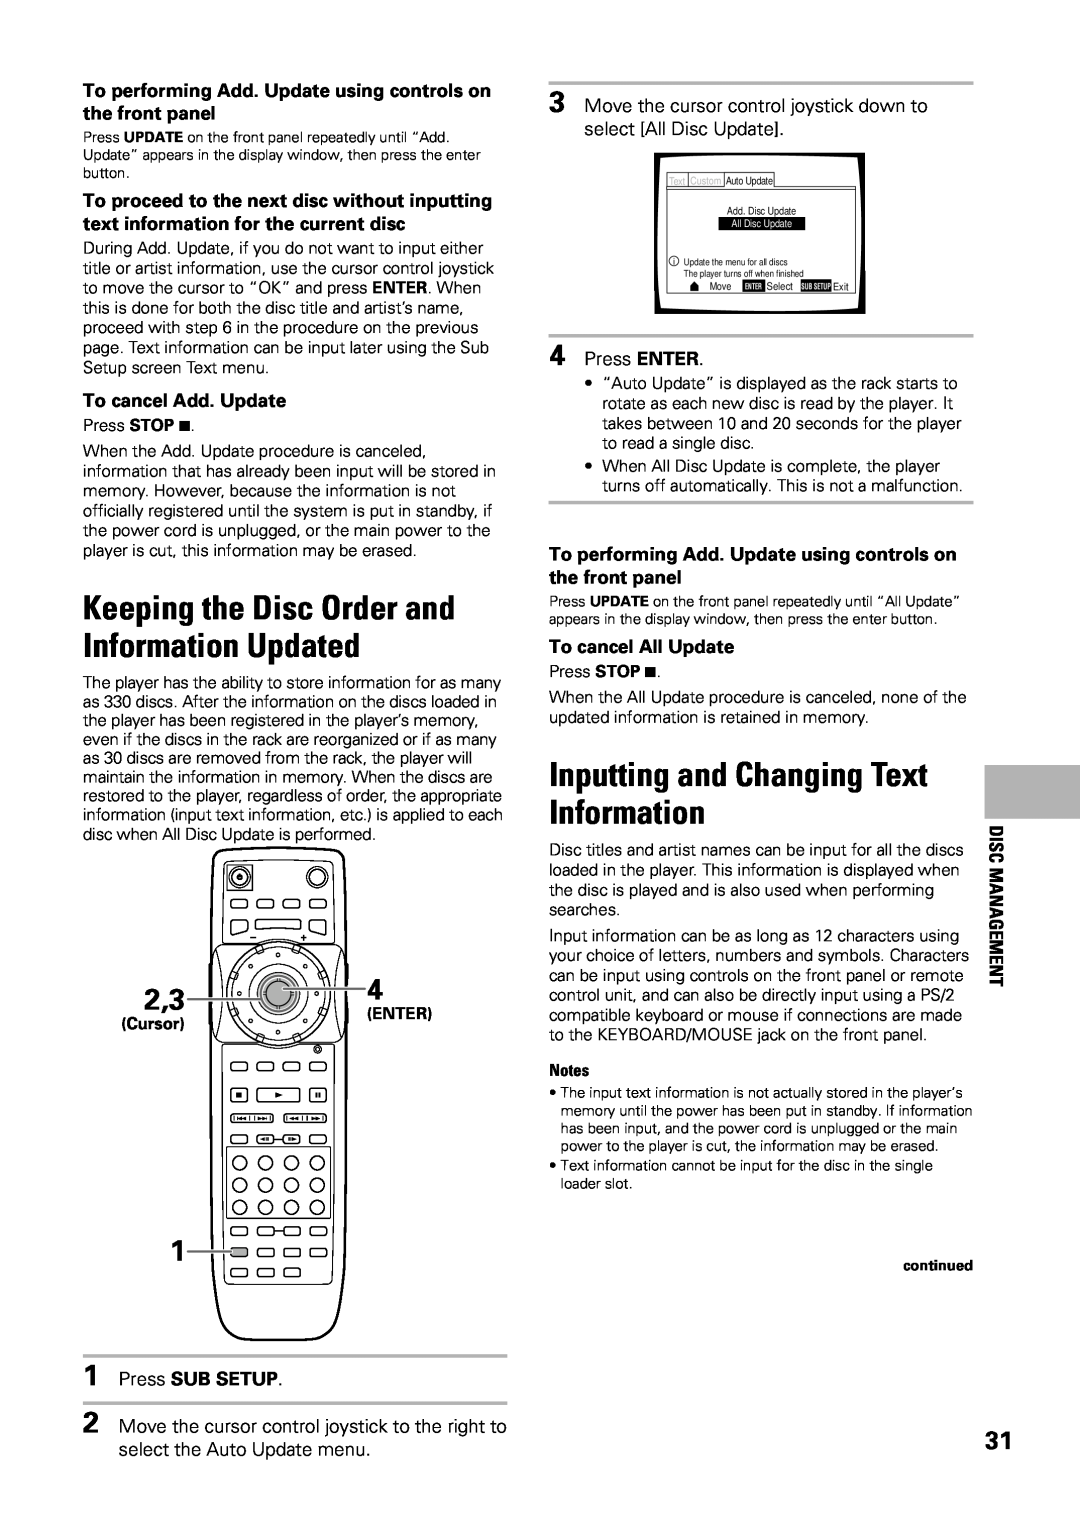 Pioneer DV-F07 Inputting and Changing Text Information, Keeping the Disc Order and Information Updated, Press ENTER, Enter 